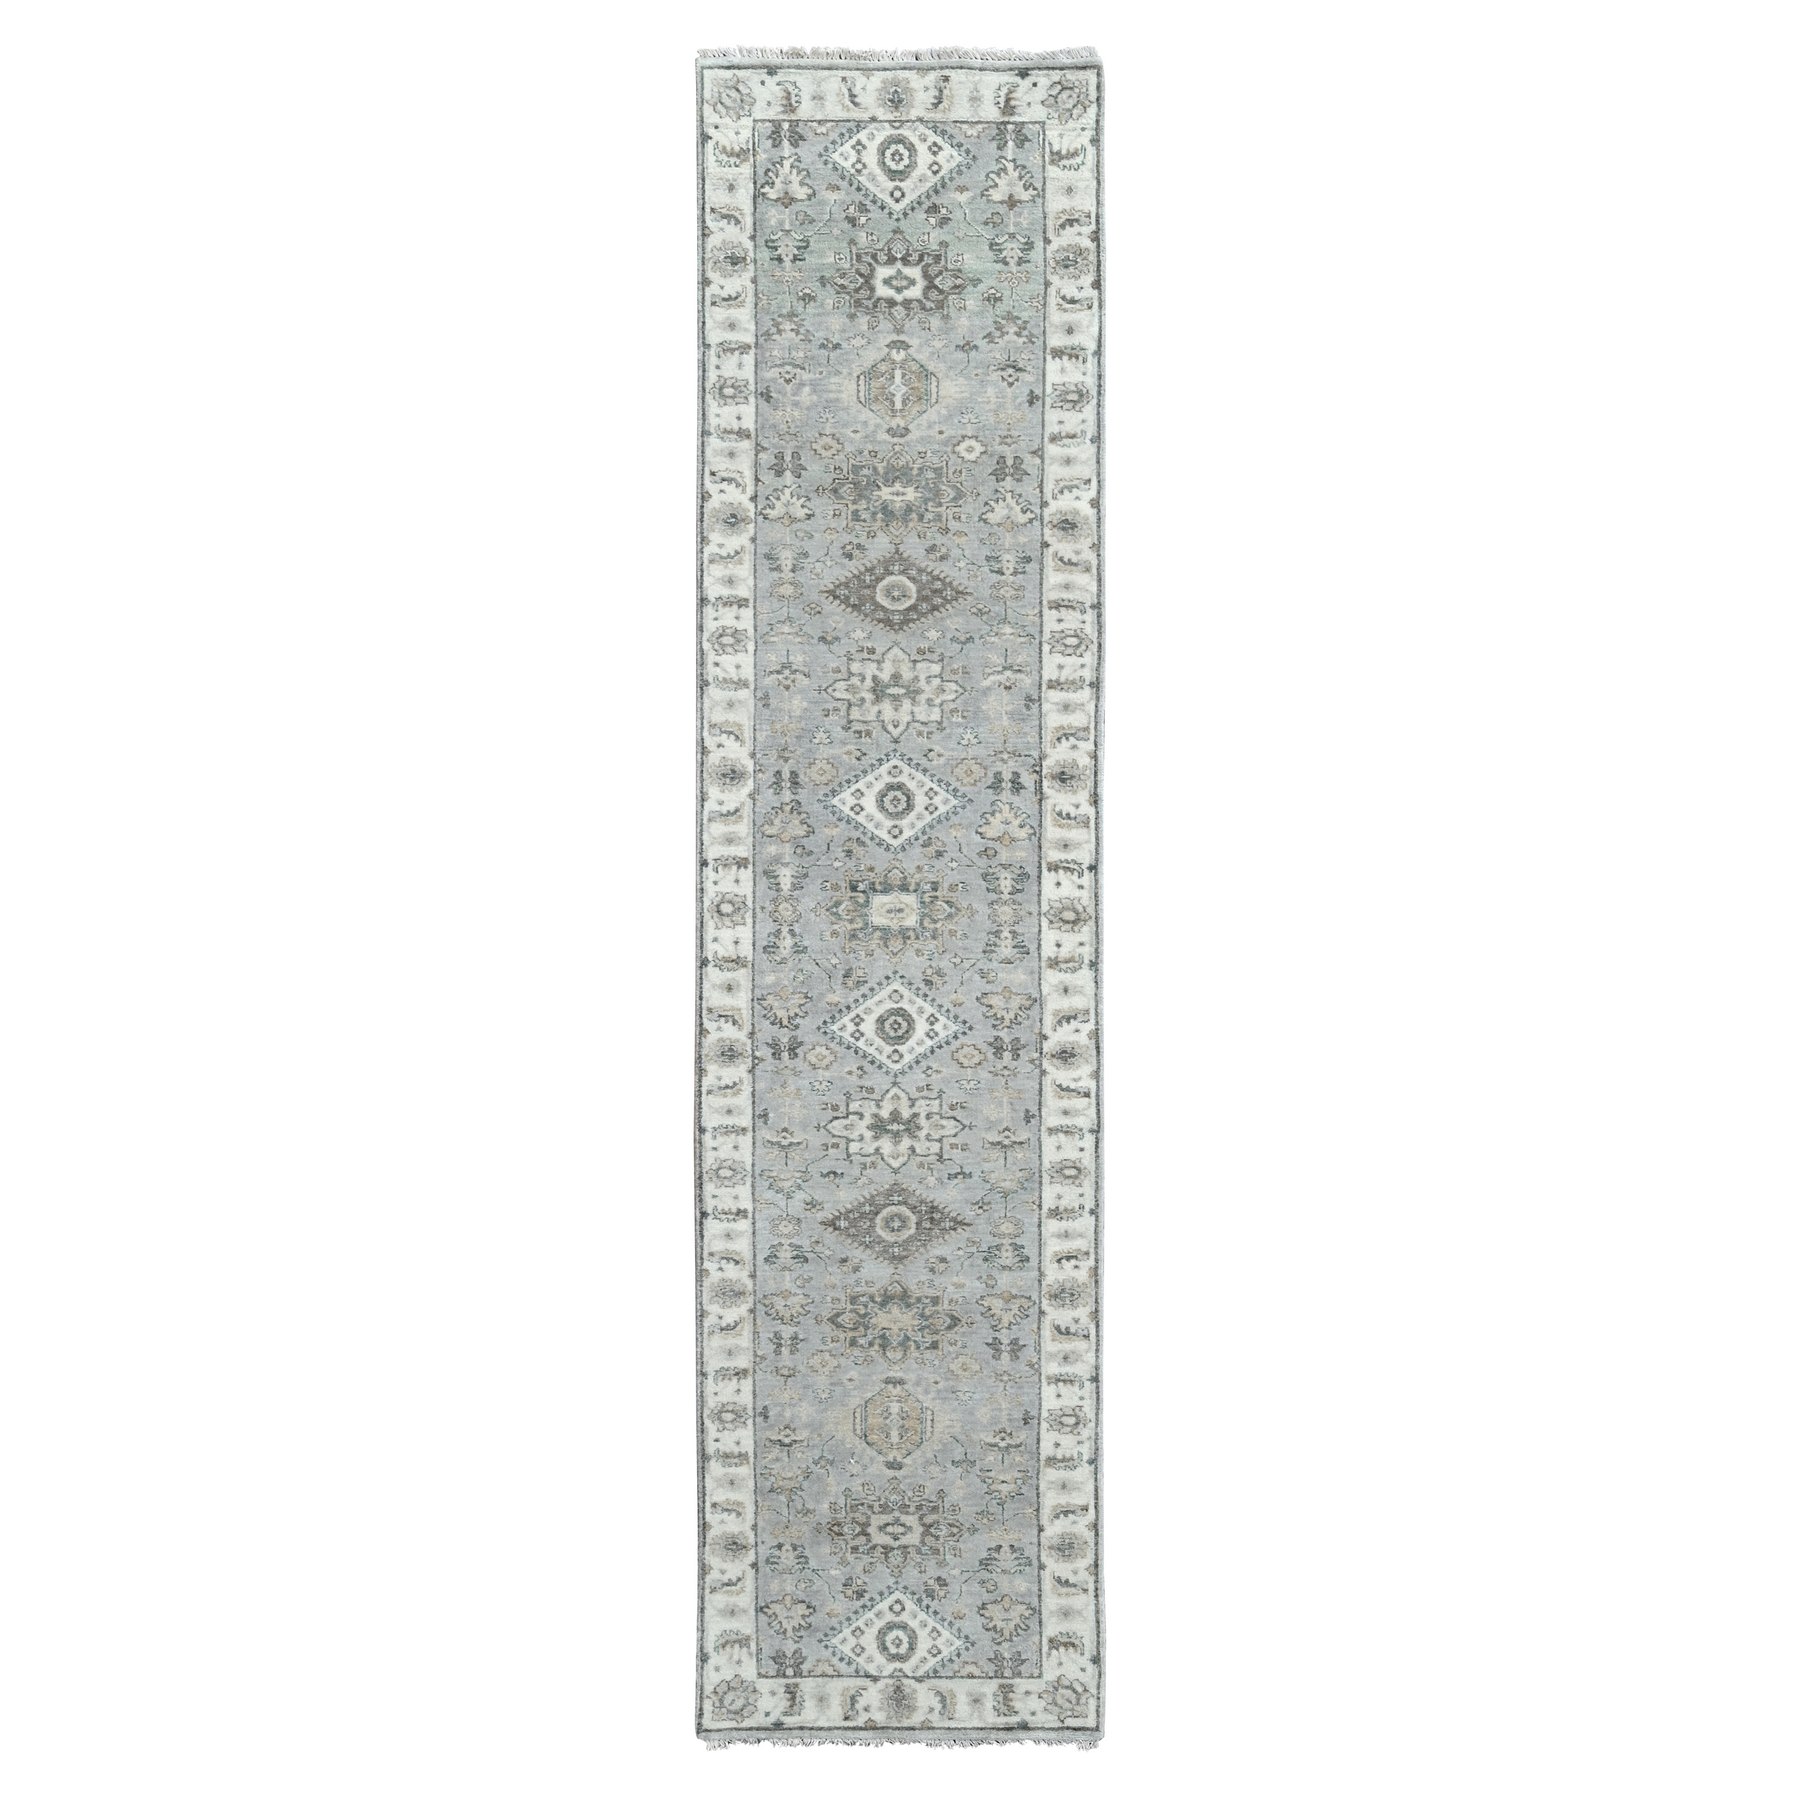 Soft Chinchilla Gray, Organic Wool, Vegetable Dyes, Hand Knotted, Karajeh Design with Geometric Medallion, Runner Oriental Rug  